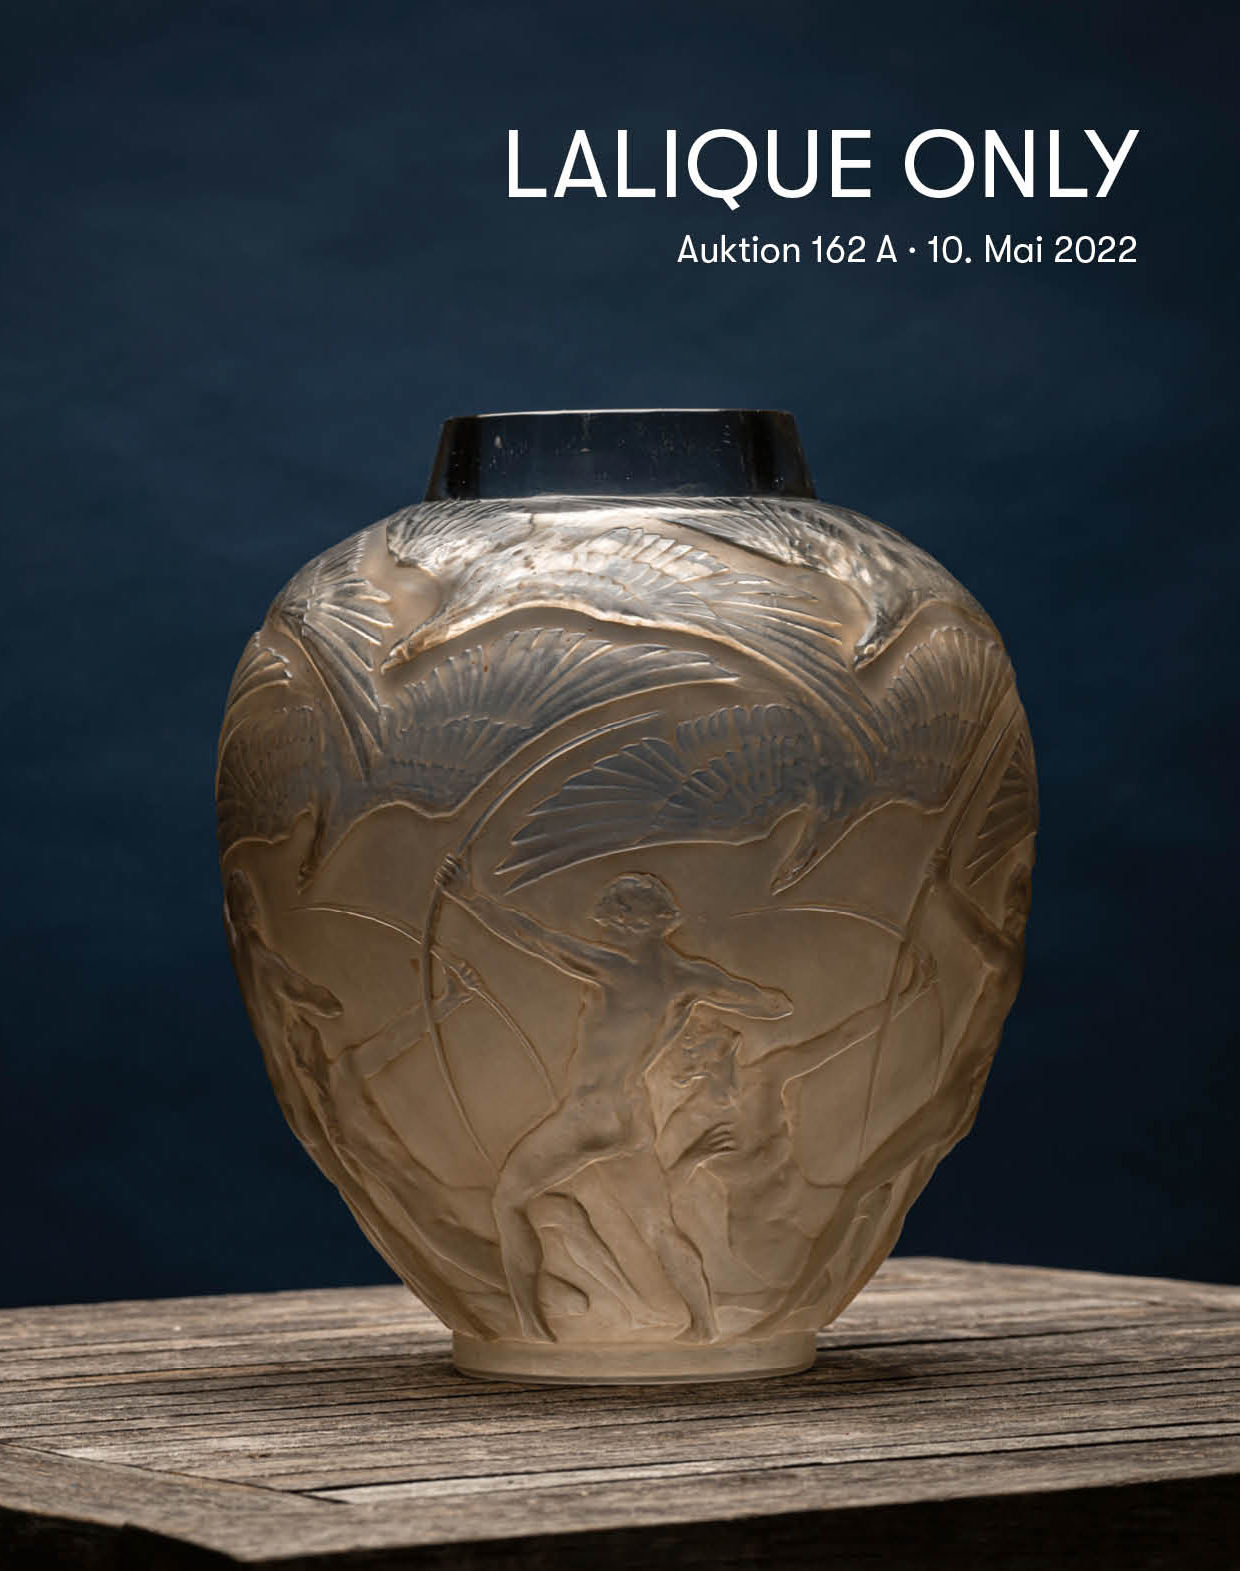 Lalique only